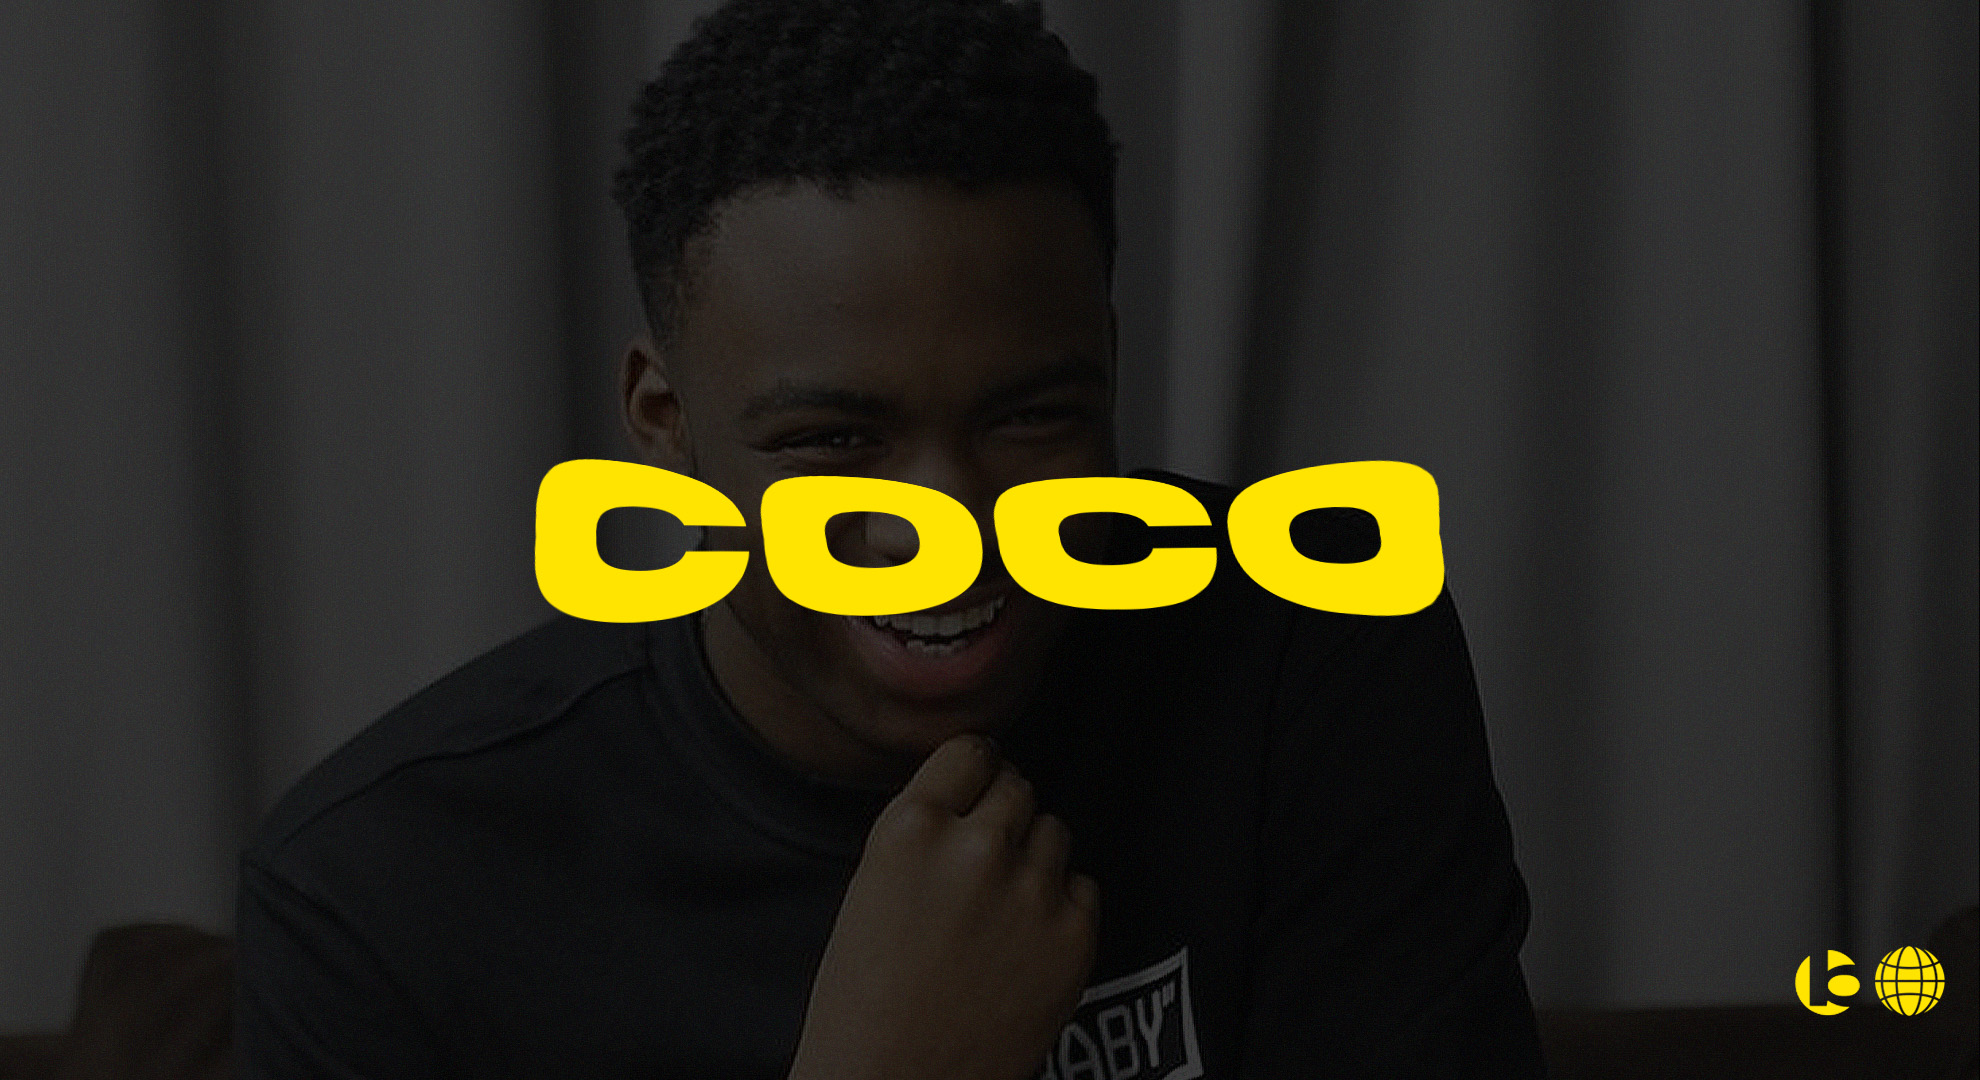 Afroswing x Afrobeat Type Beat – “COCO”